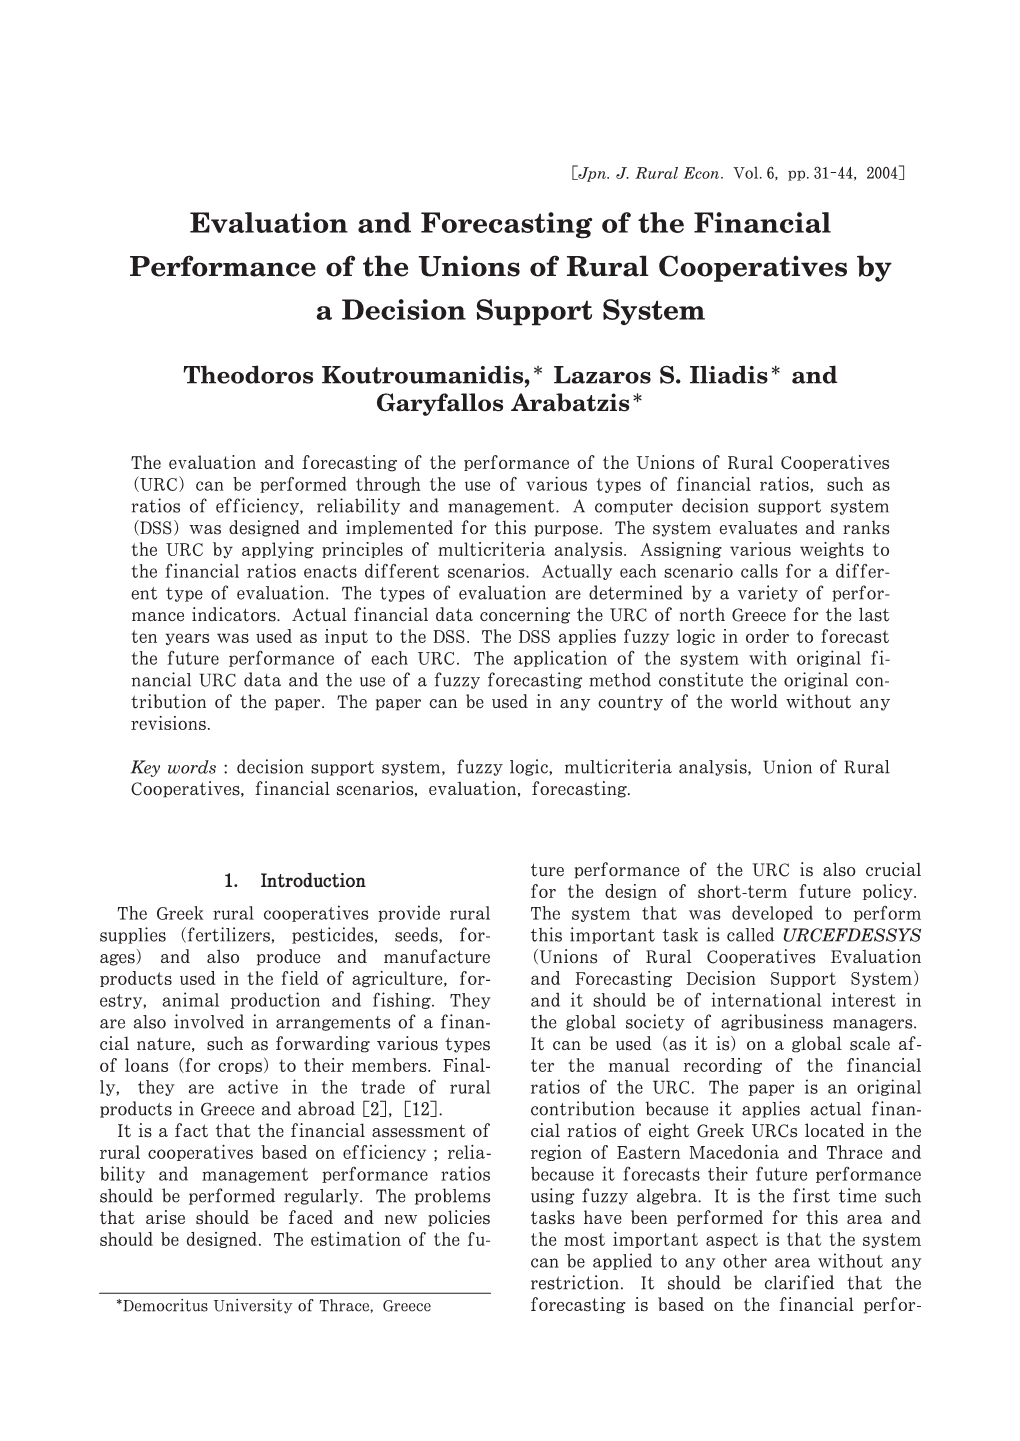 Evaluation and Forecasting of the Financial Performance of the Unions of Rural Cooperatives by a Decision Support System